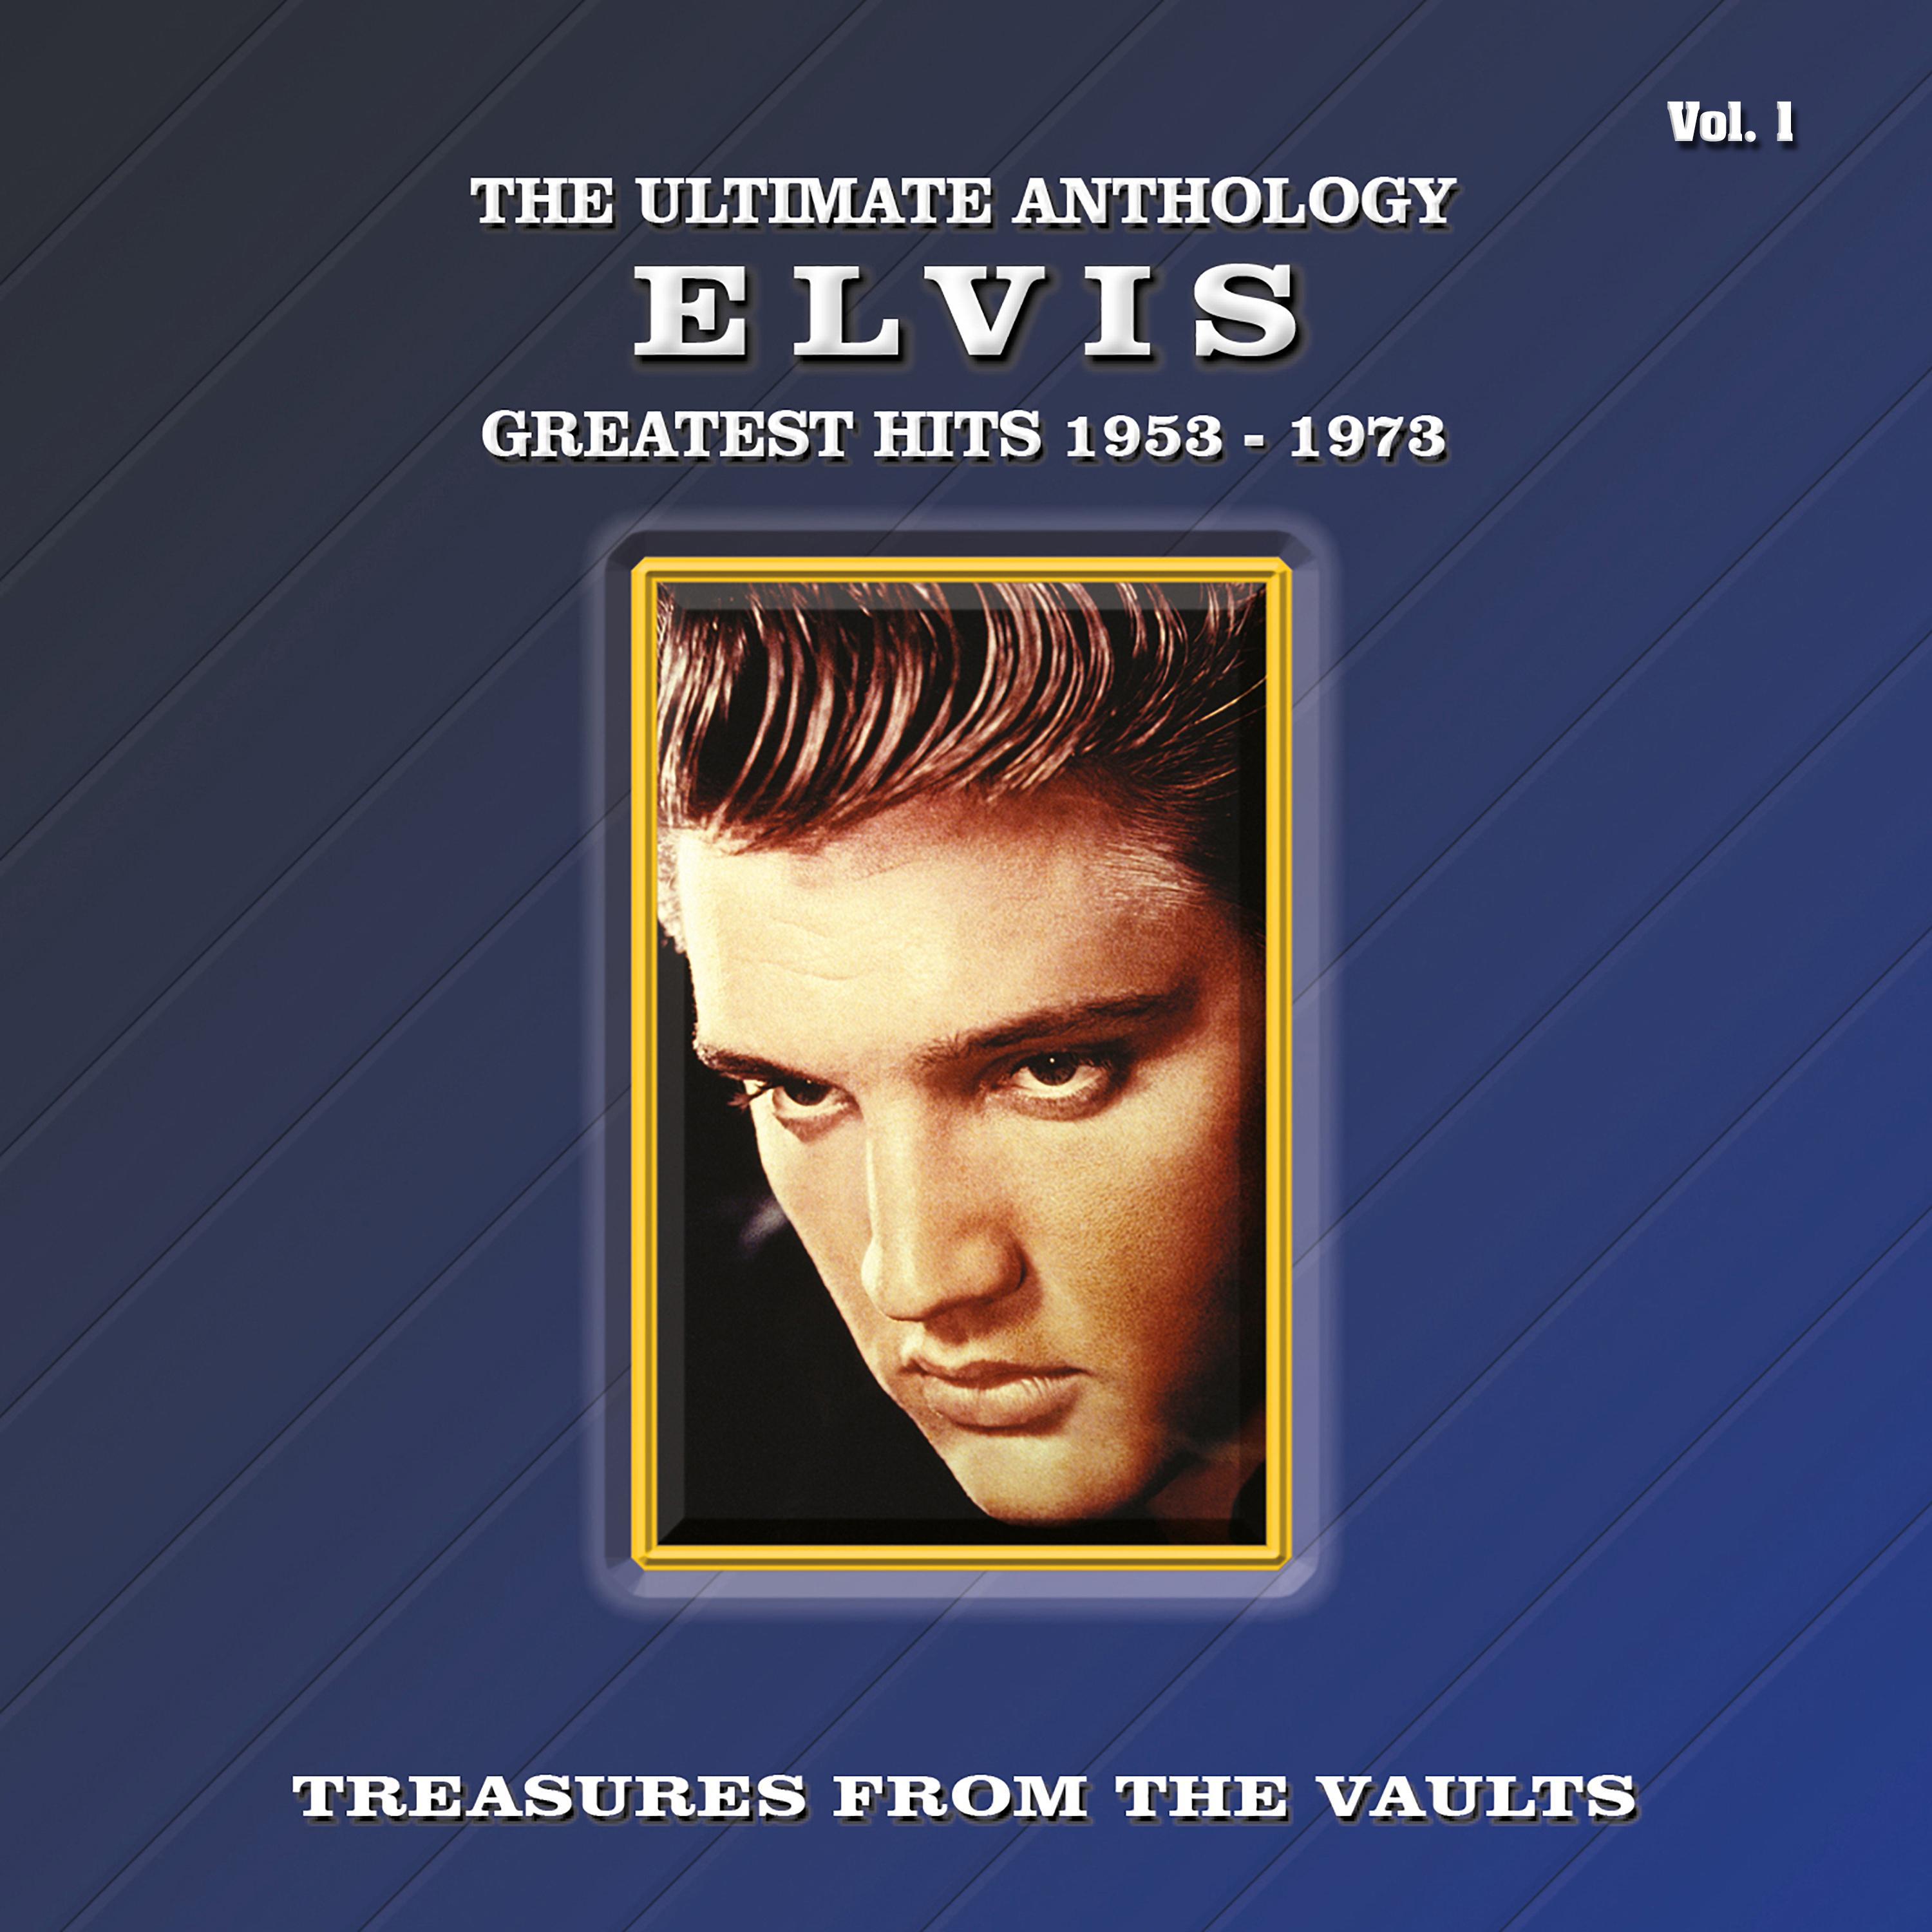 The Ultimate Anthology - Greatest Hits 1953-1973, Vol. 1专辑